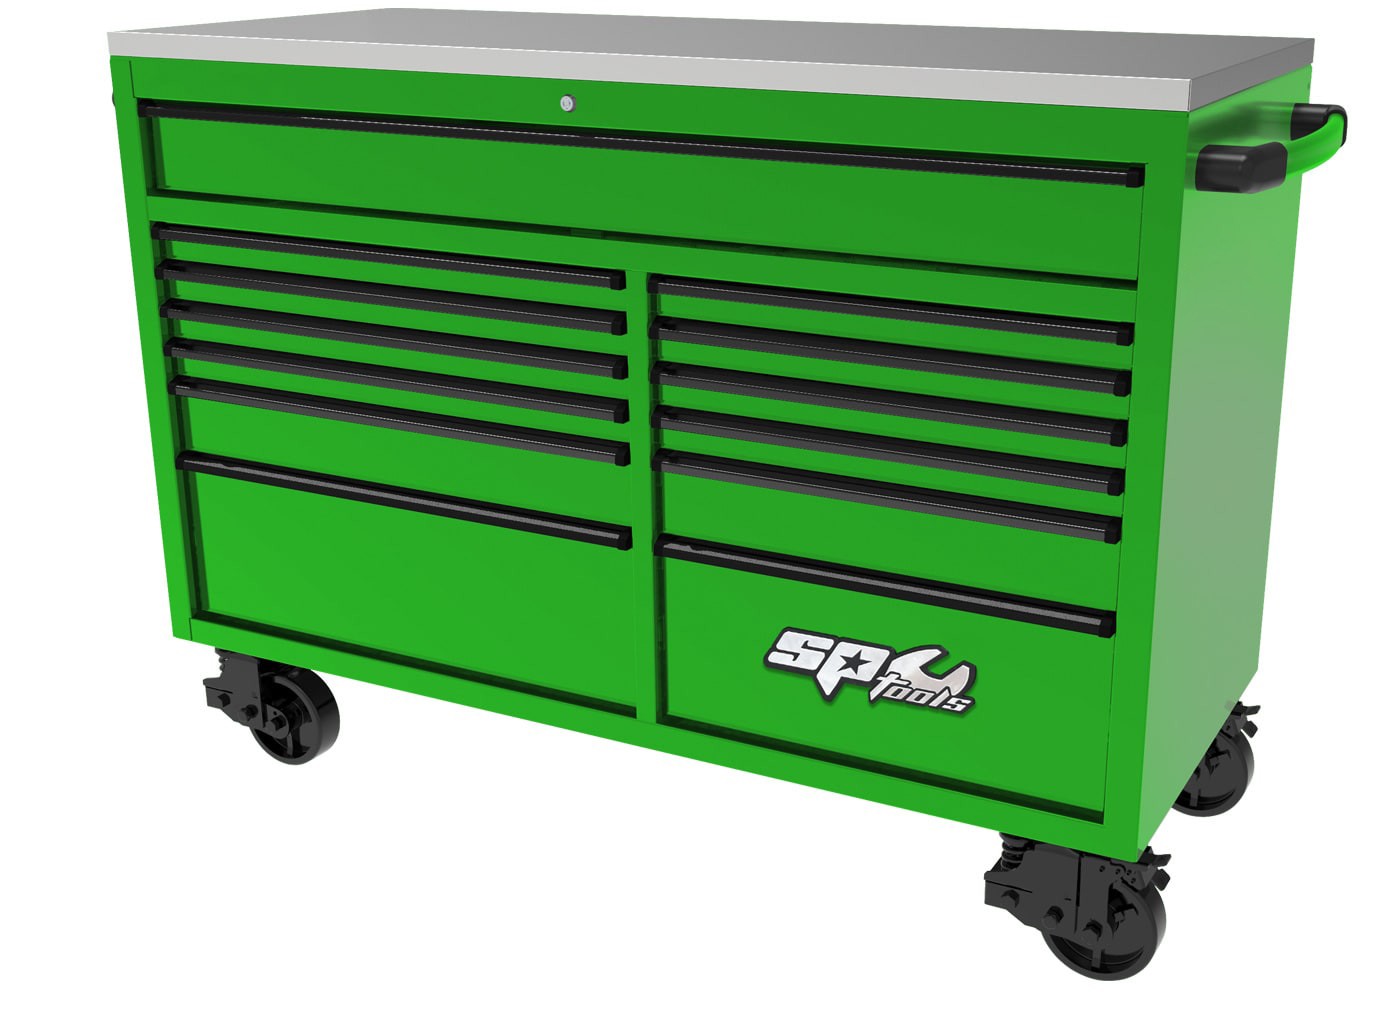 59" USA SUMO Series Wide Roller Cabinet, 13 Drawer by SP Tools